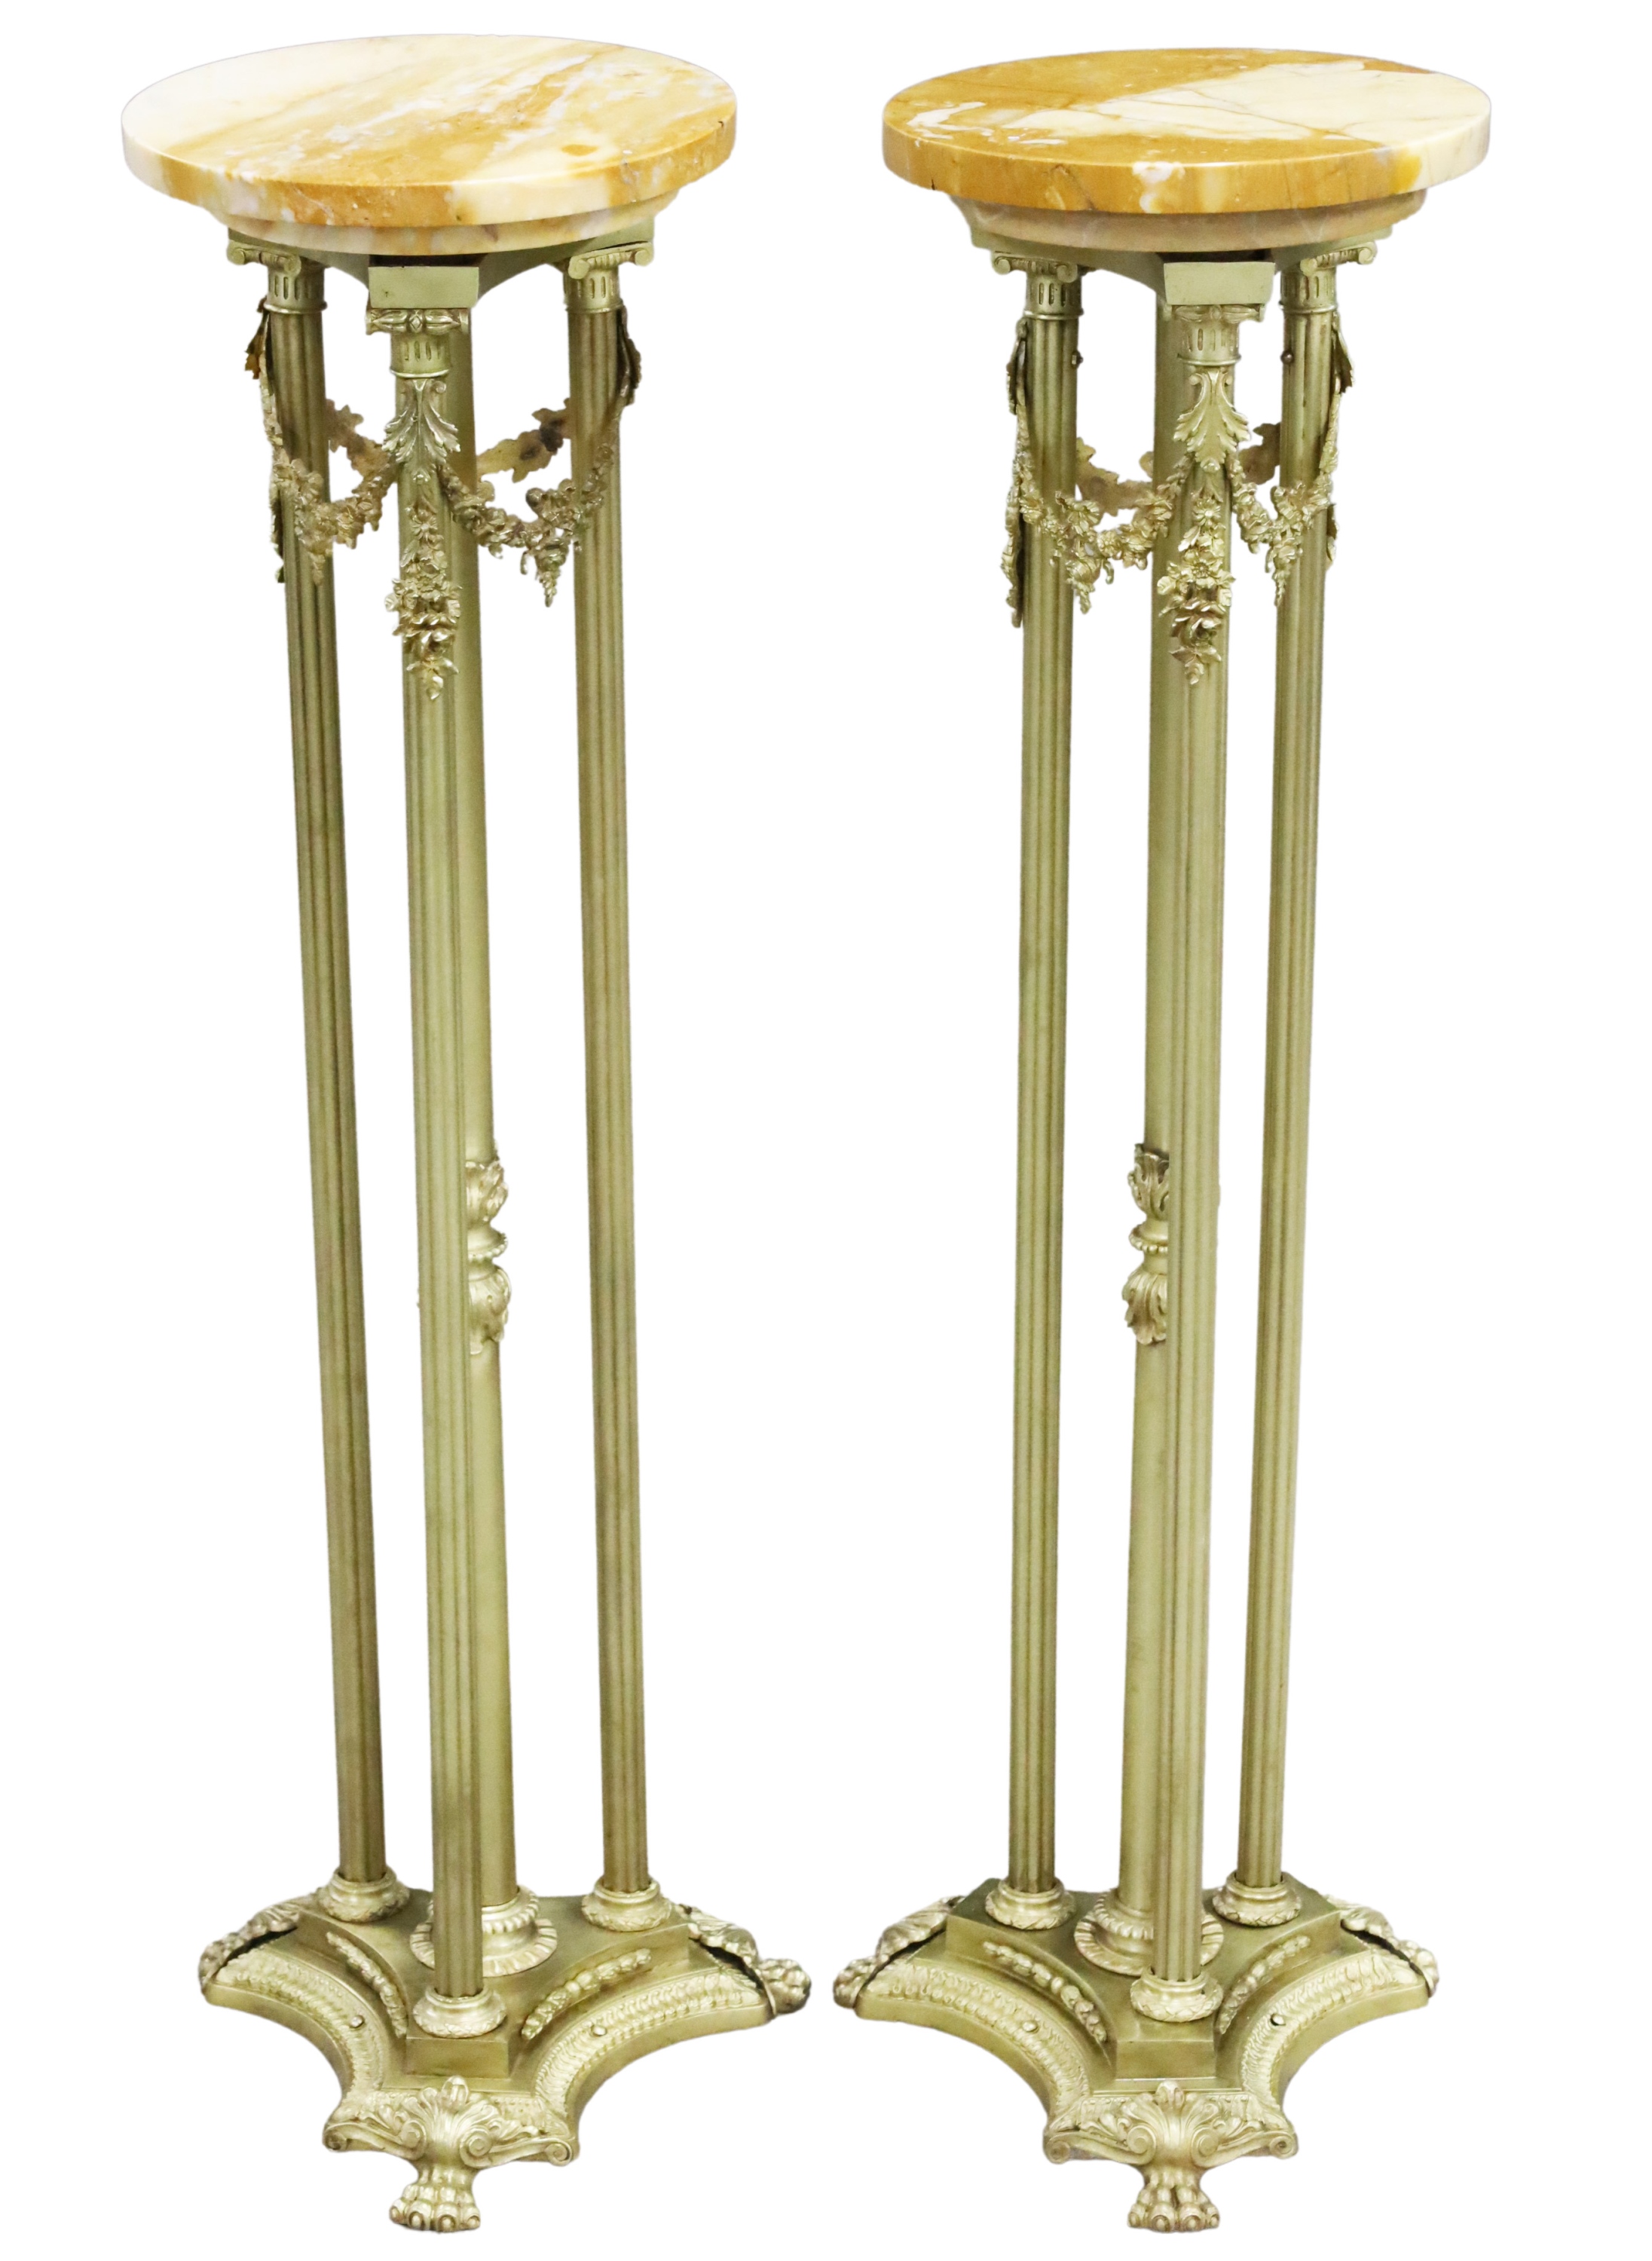 PAIR OF NEOCLASSICAL PEDESTAL STANDS 2f8d10